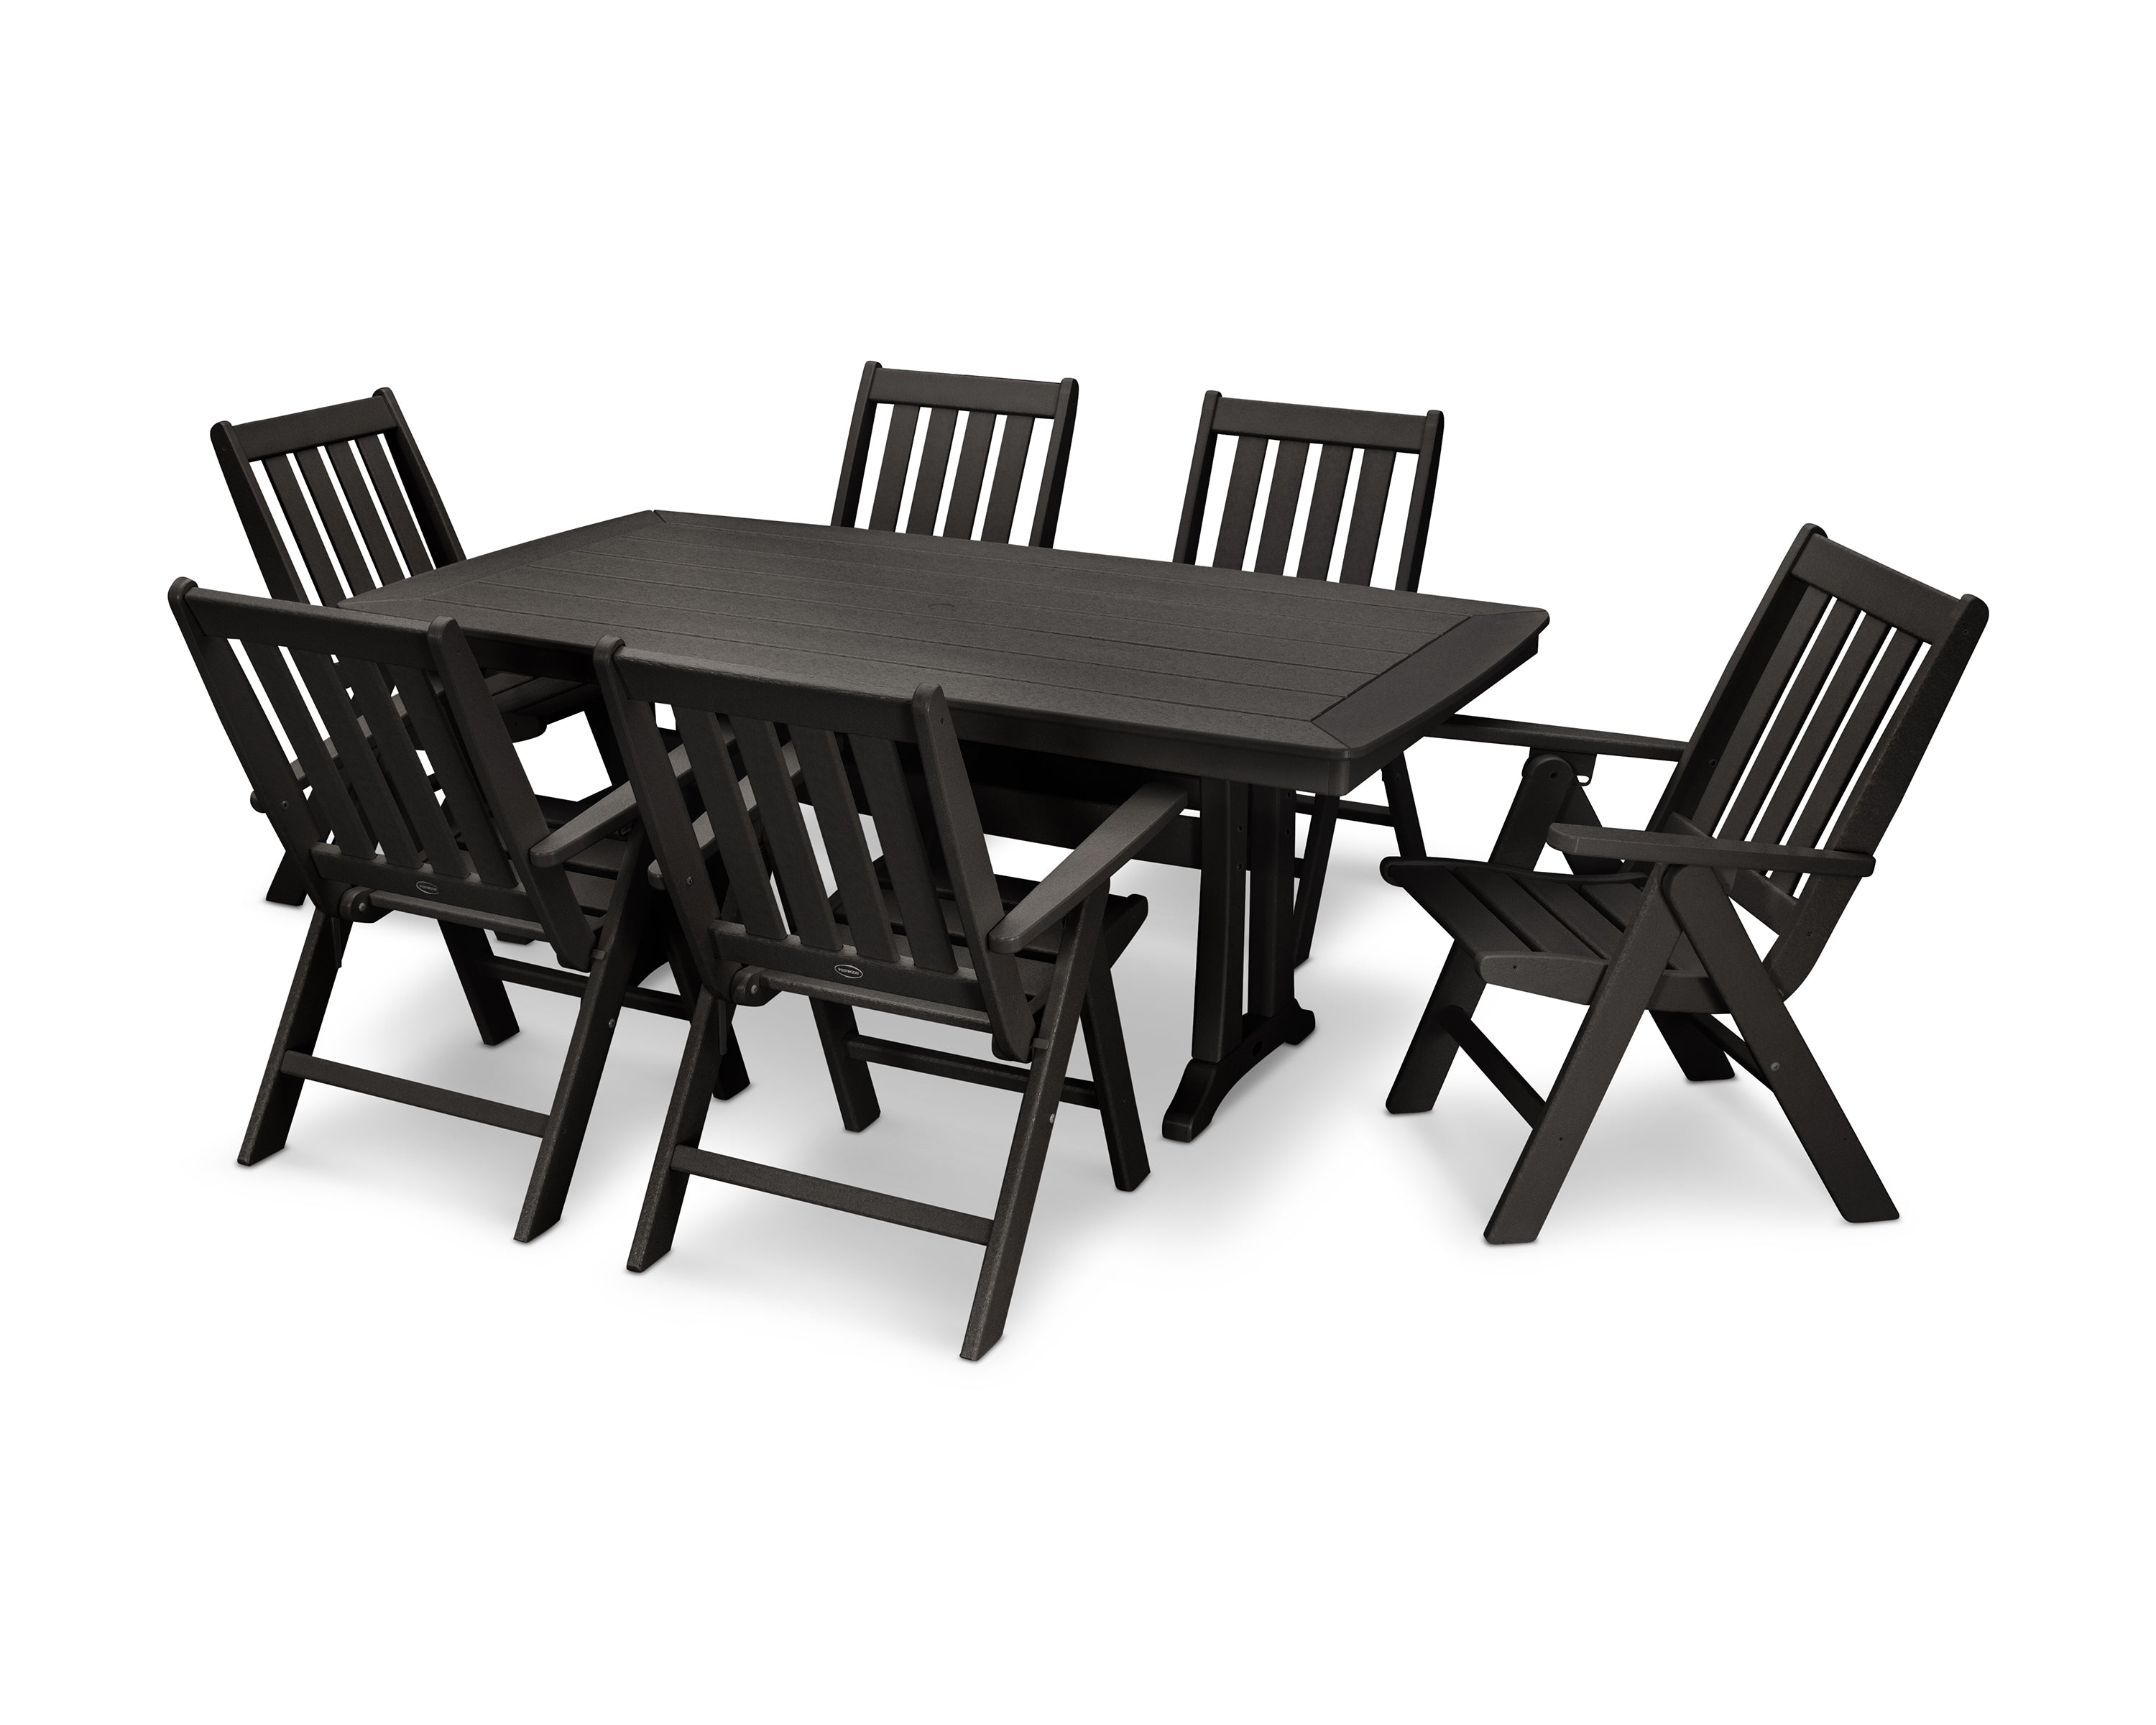 POLYWOOD® Vineyard Folding Chair 7-Piece Dining Set with Trestle Legs in Black